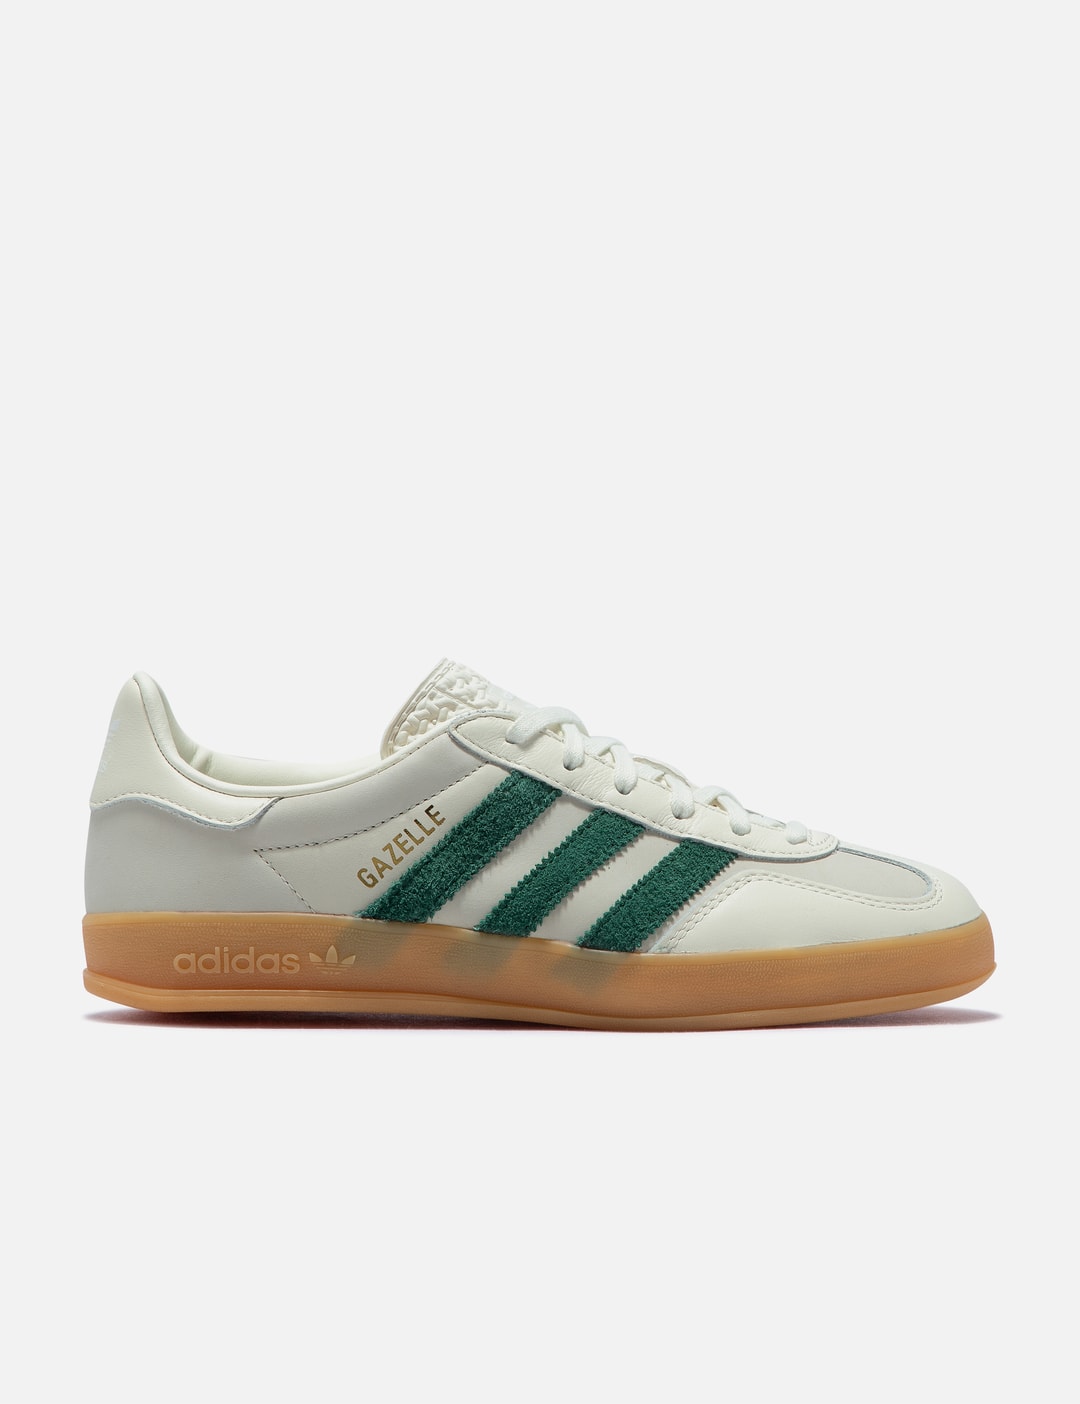 Adidas Originals - GAZELLE | - Globally Curated Fashion and Lifestyle by